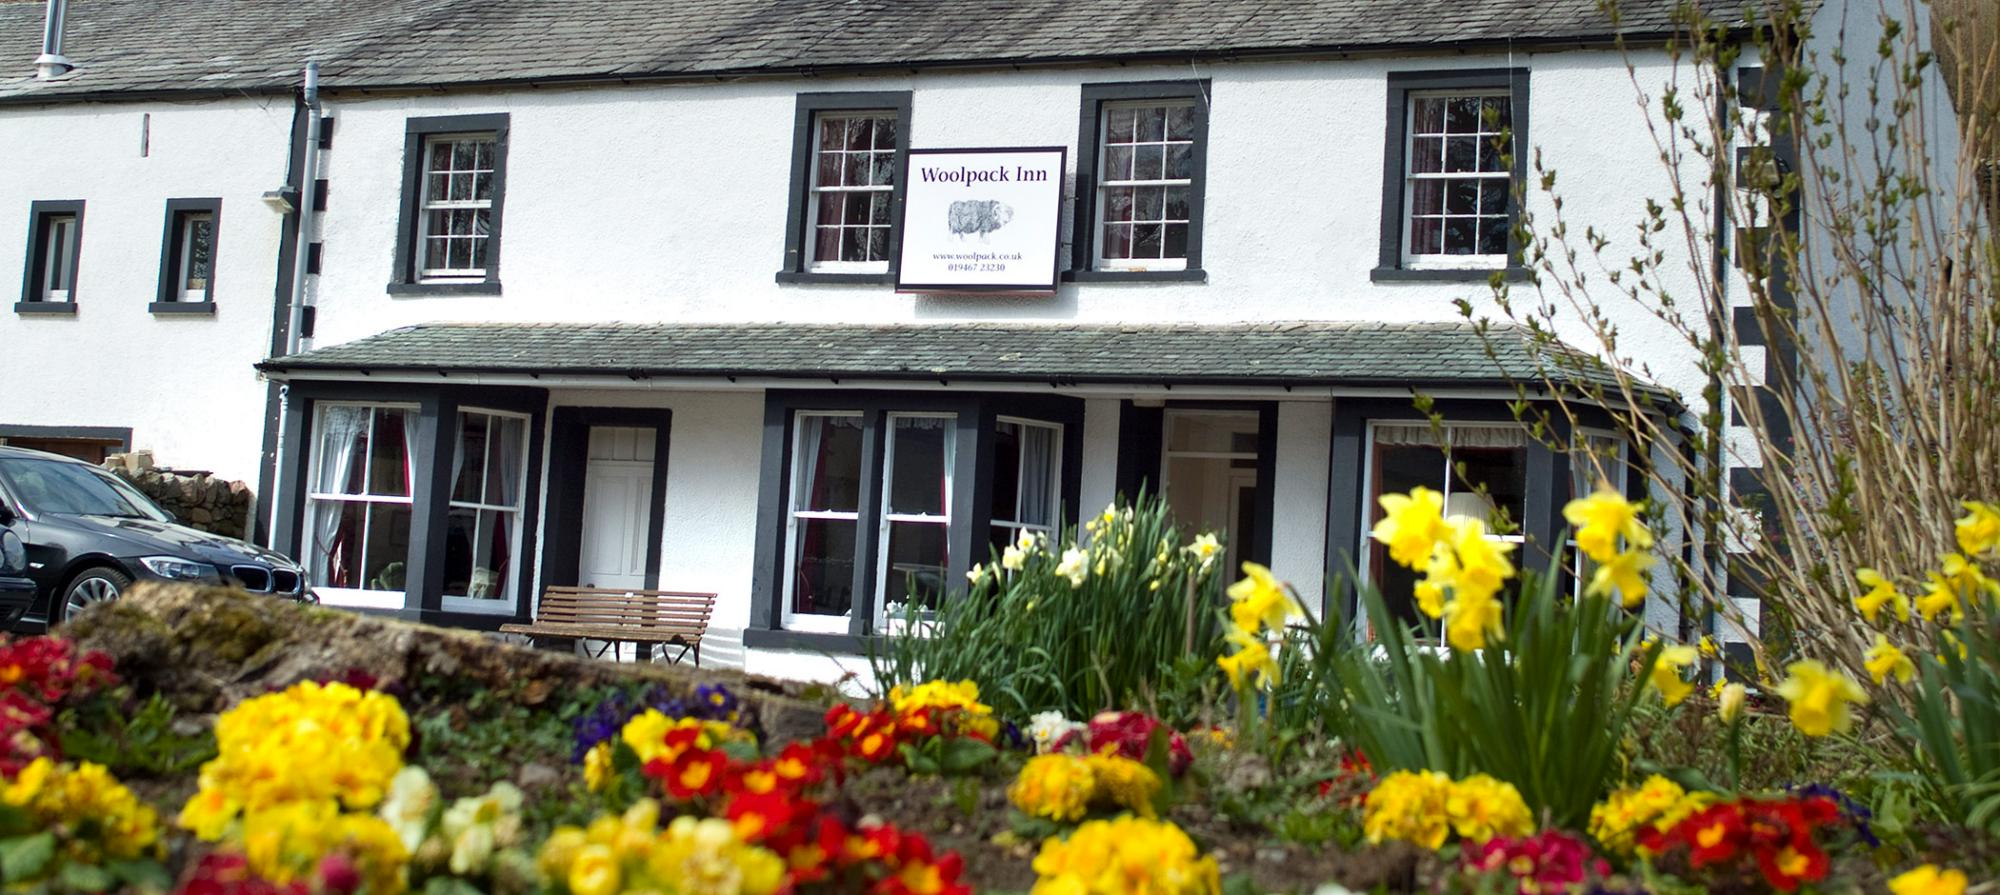 Hotels in Cumbria holidays at Cool Places